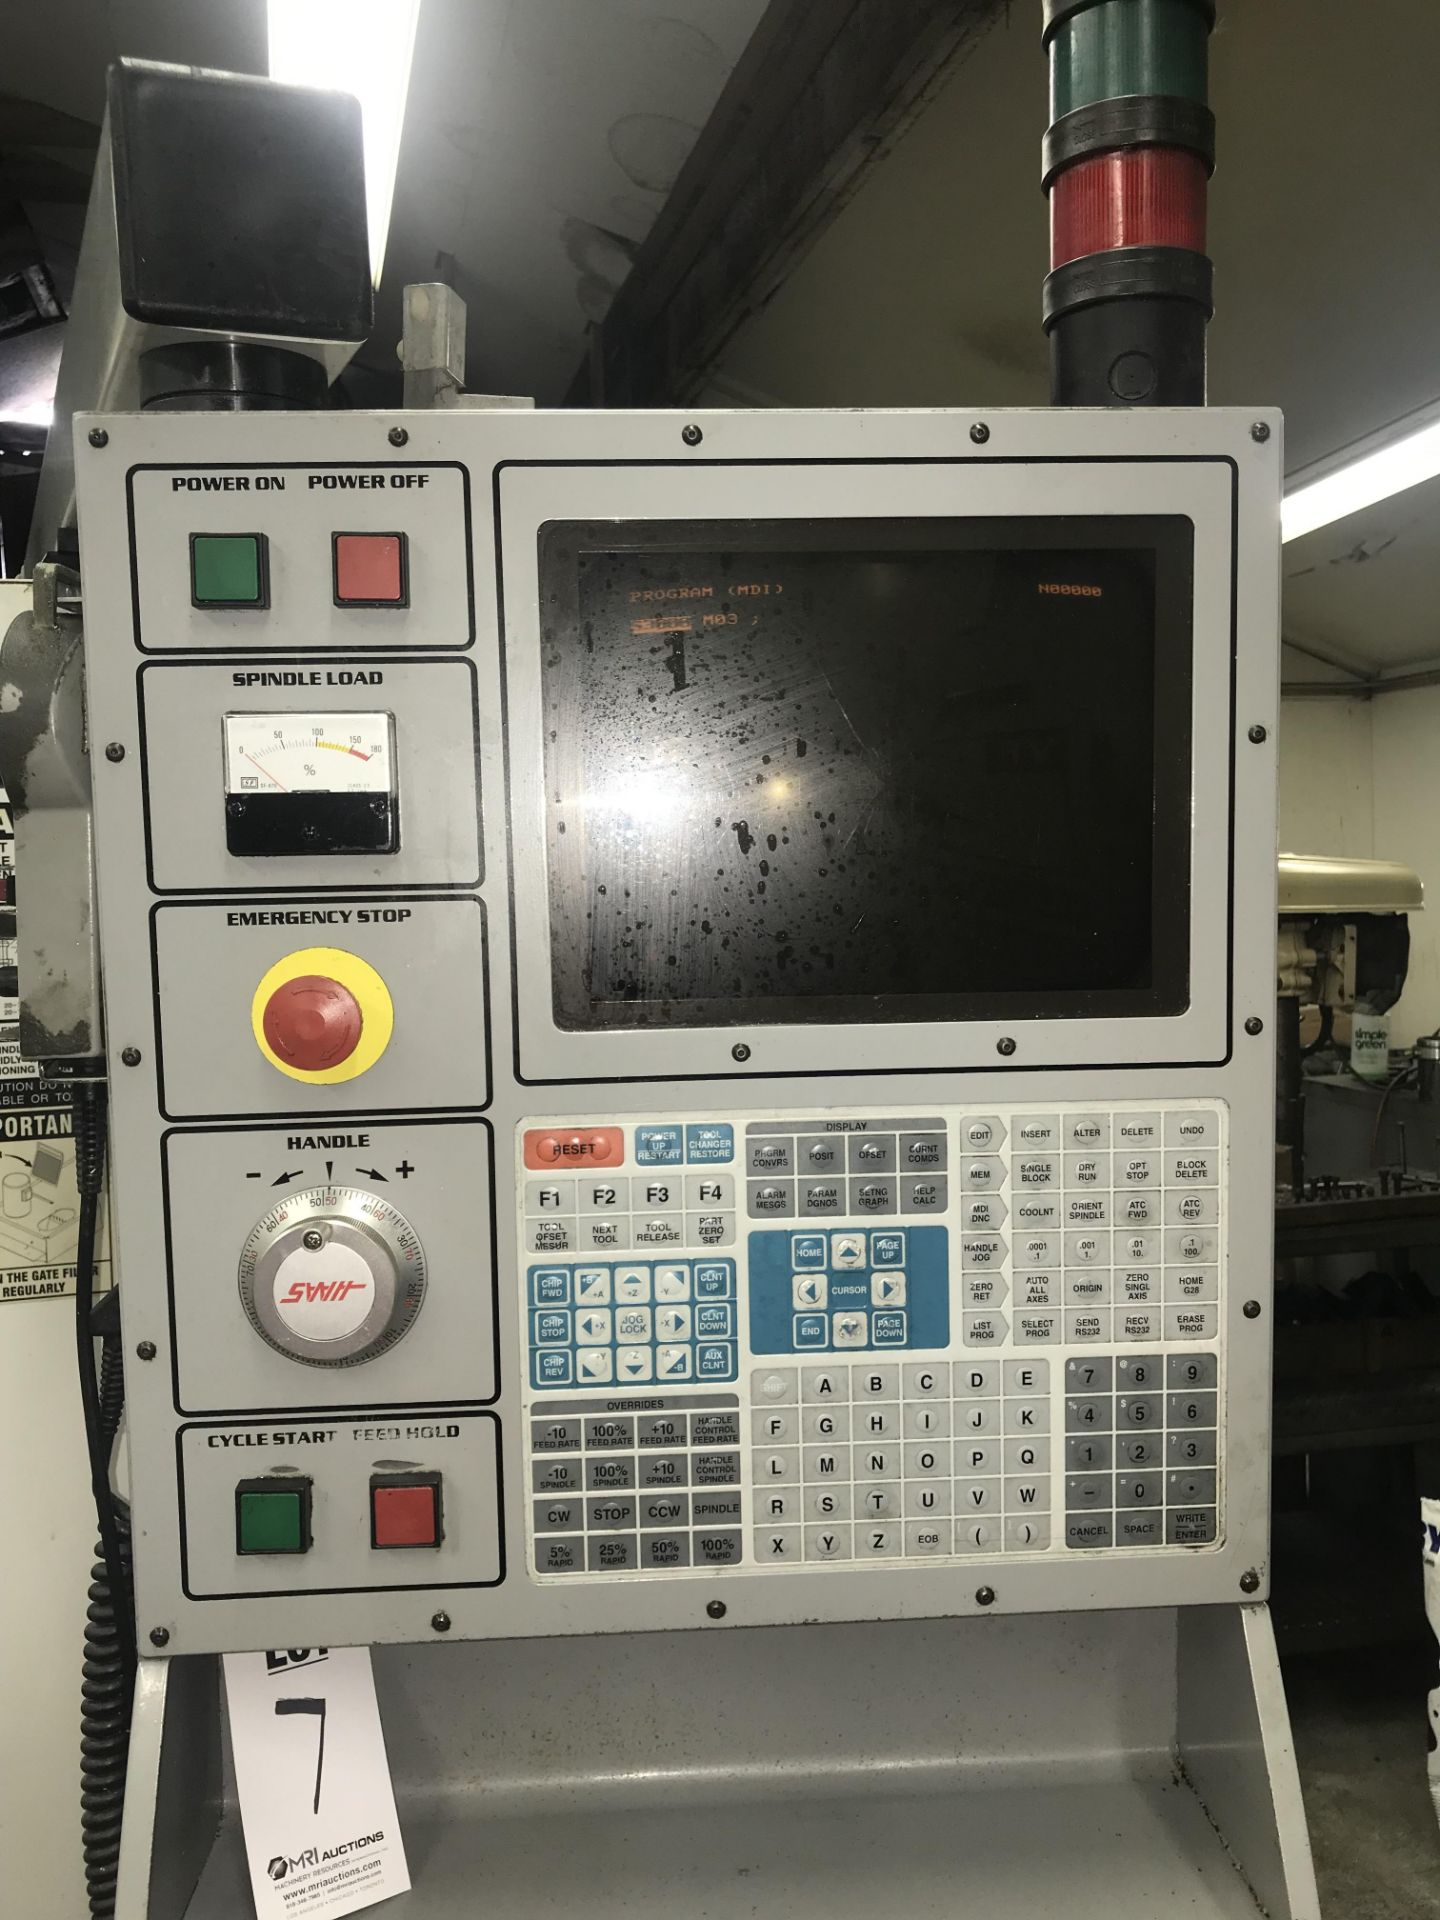 2000 HAAS VF-4 20 TOOL CAROUSEL, GEARED DRIVE, FLOPPY DRIVE IS DOWN, INCLUDES RS 232 INTERFACE, - Image 7 of 10